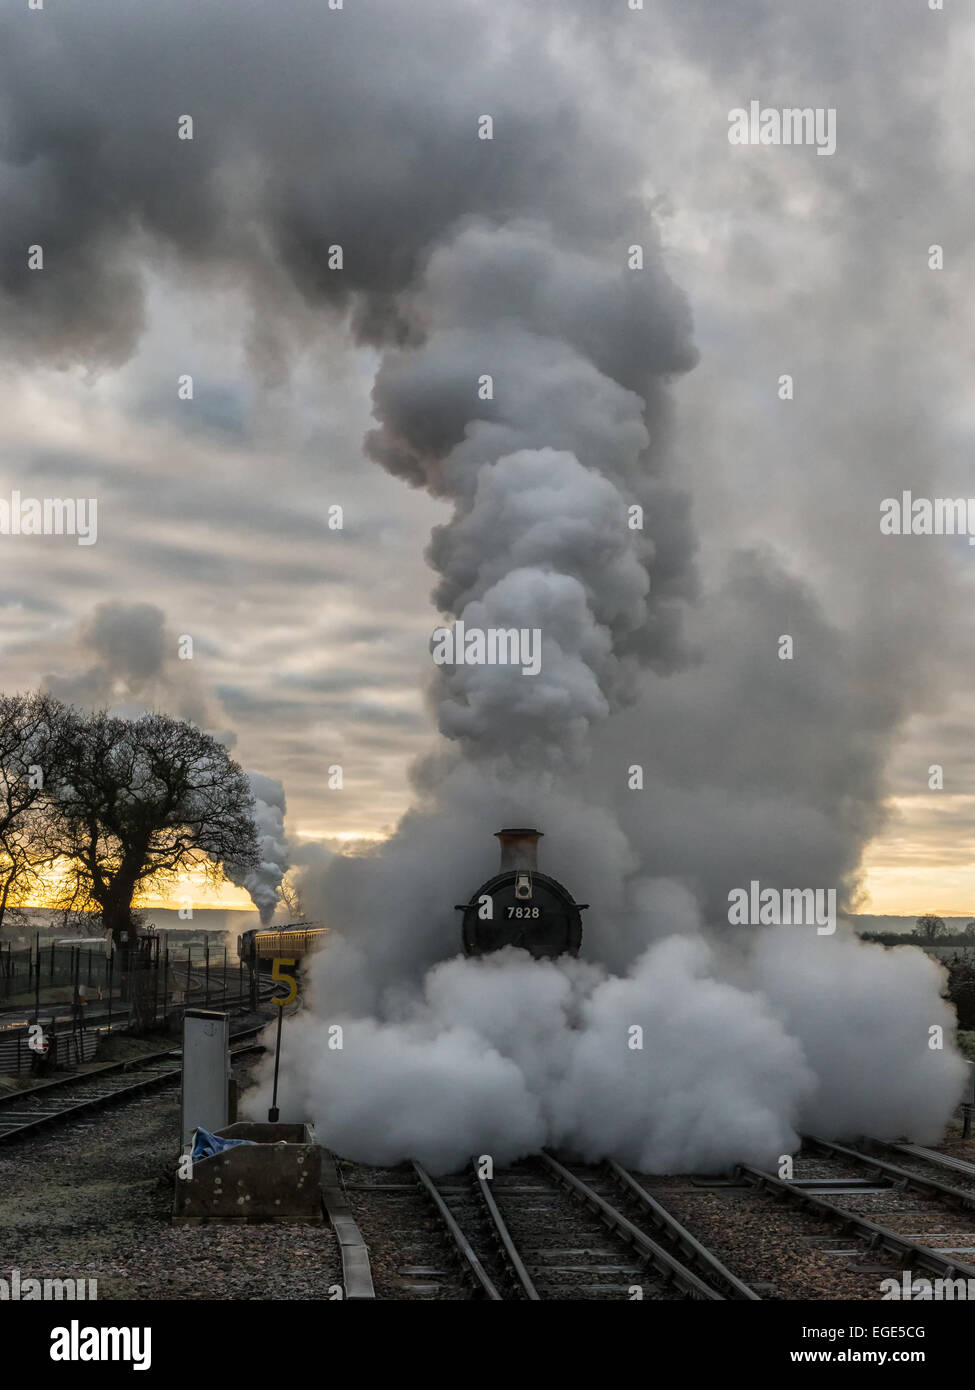 First light on a frosty morning at Bishops Lydeard station and 7828 GWR Odney Manor emerges from a cloud of steam and smoke. Stock Photo